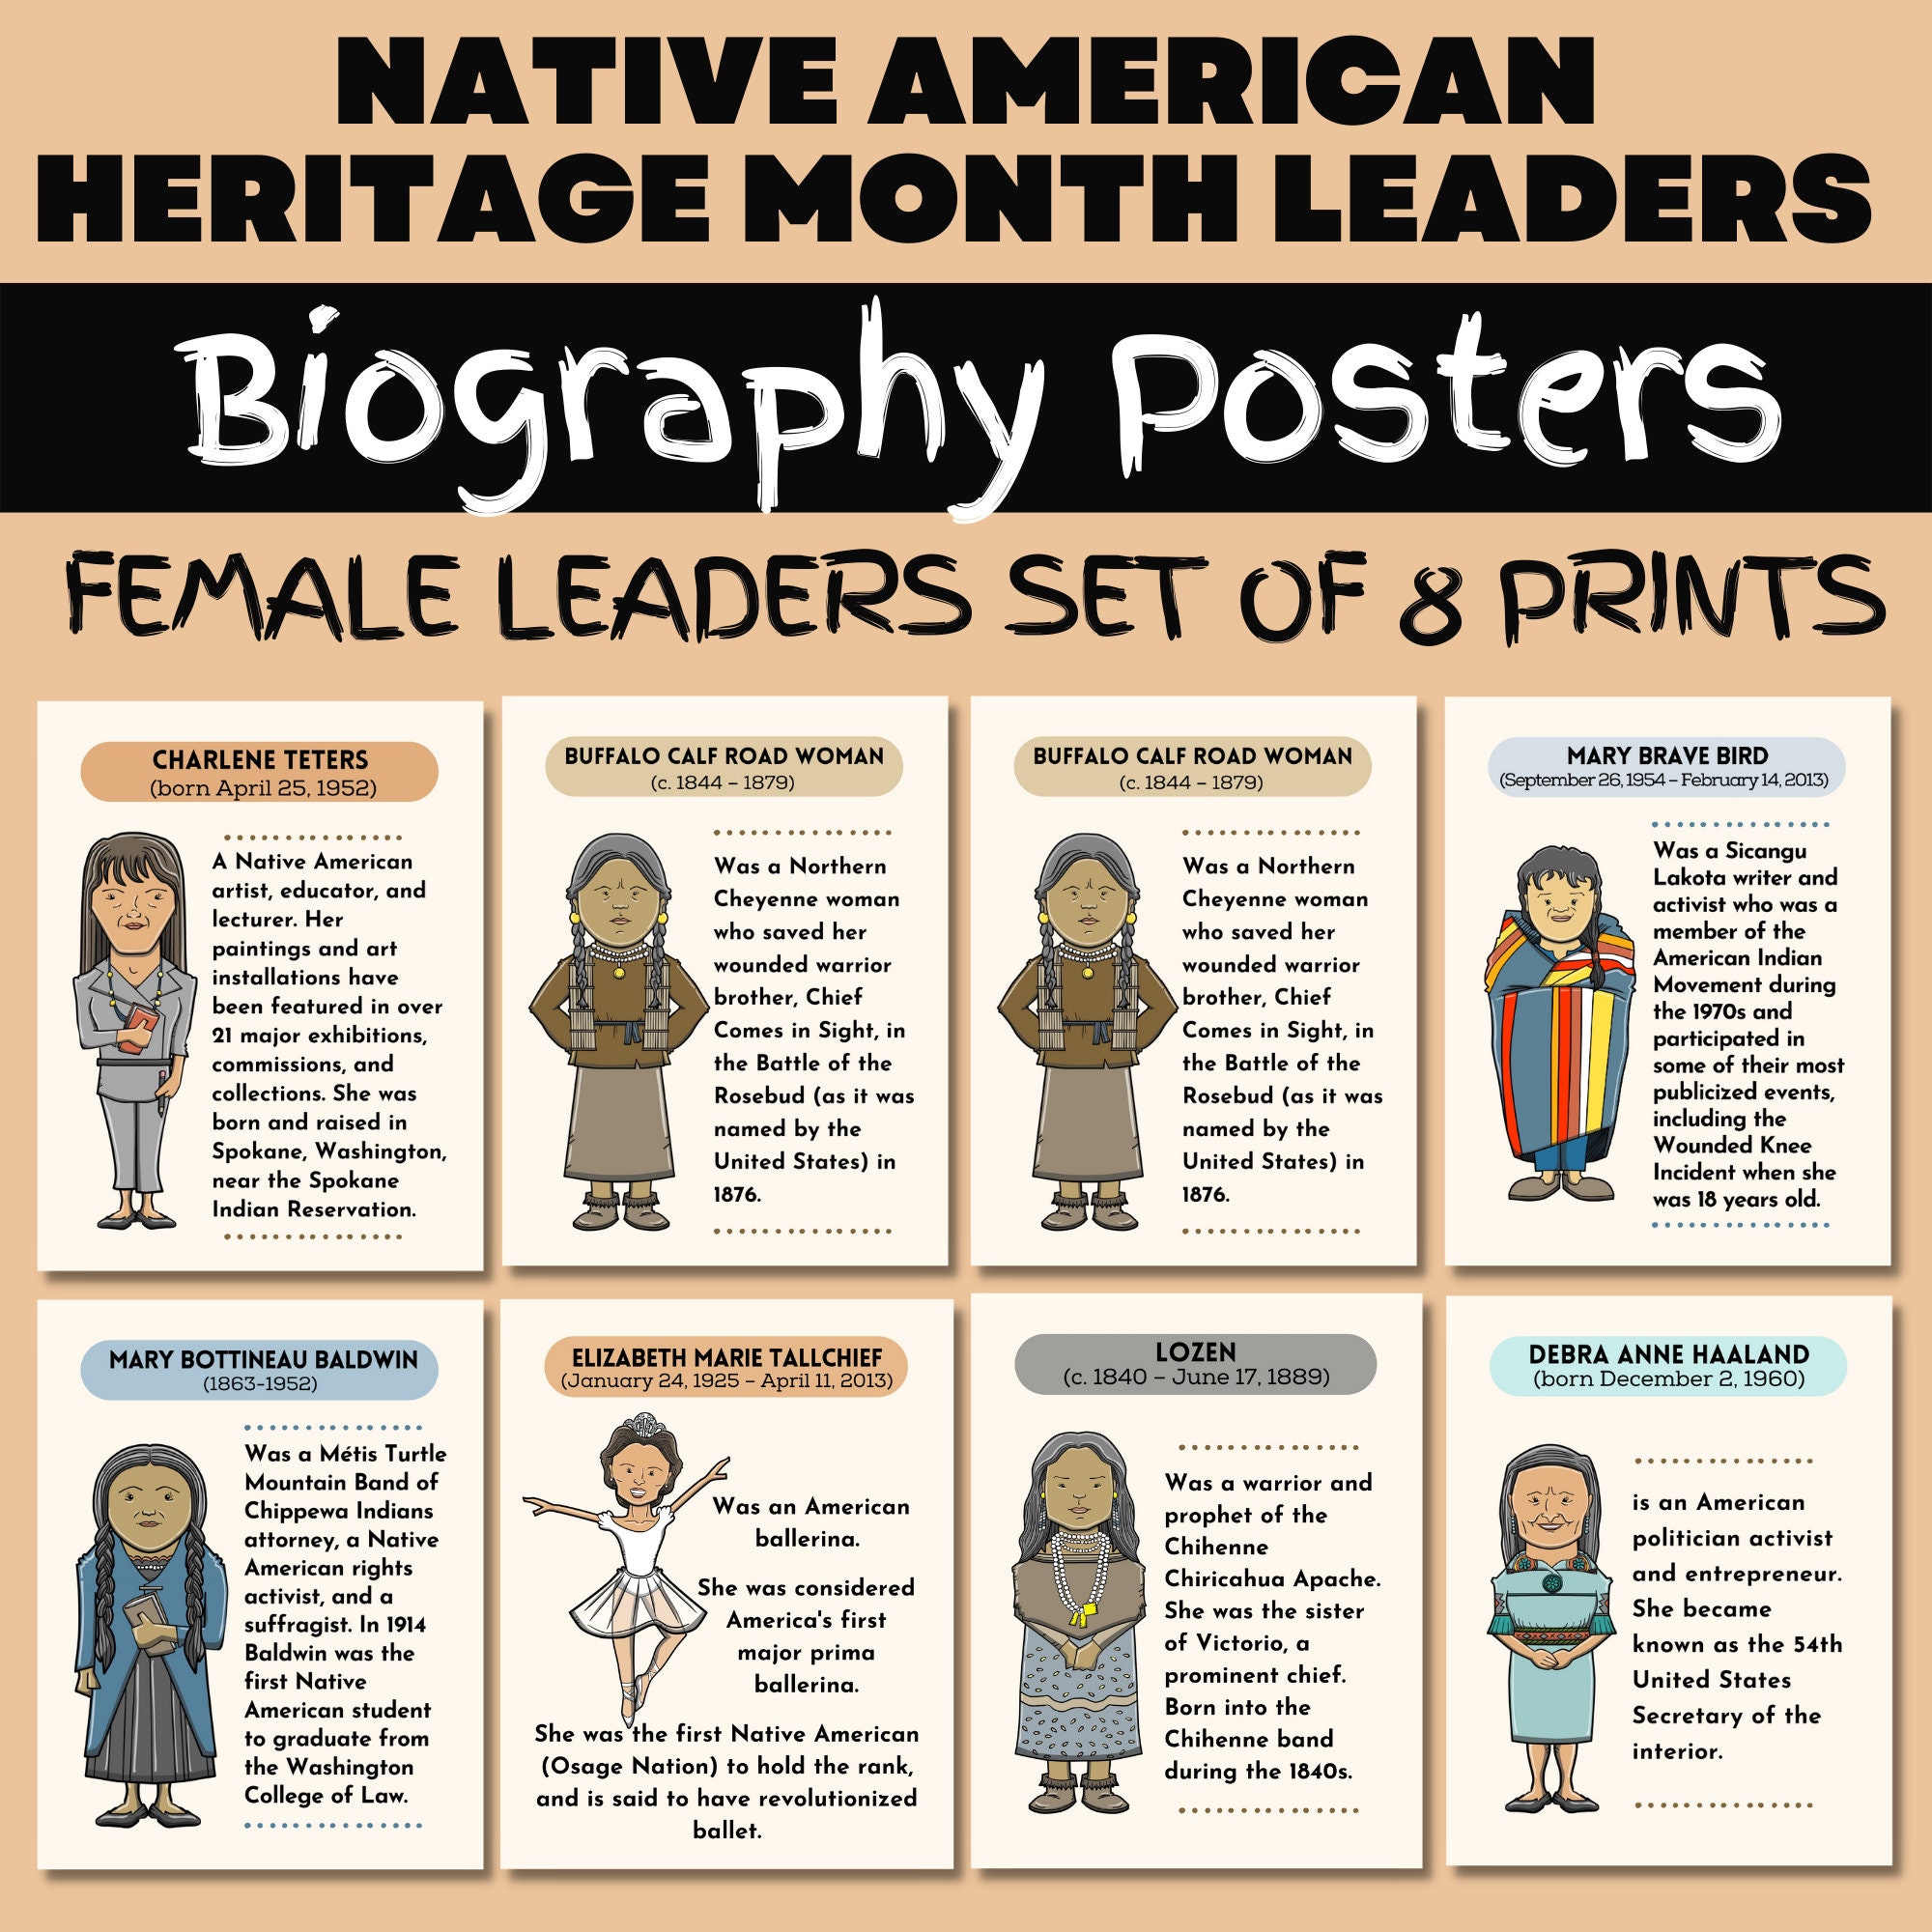 8 Things to Know About Native American Heritage Month